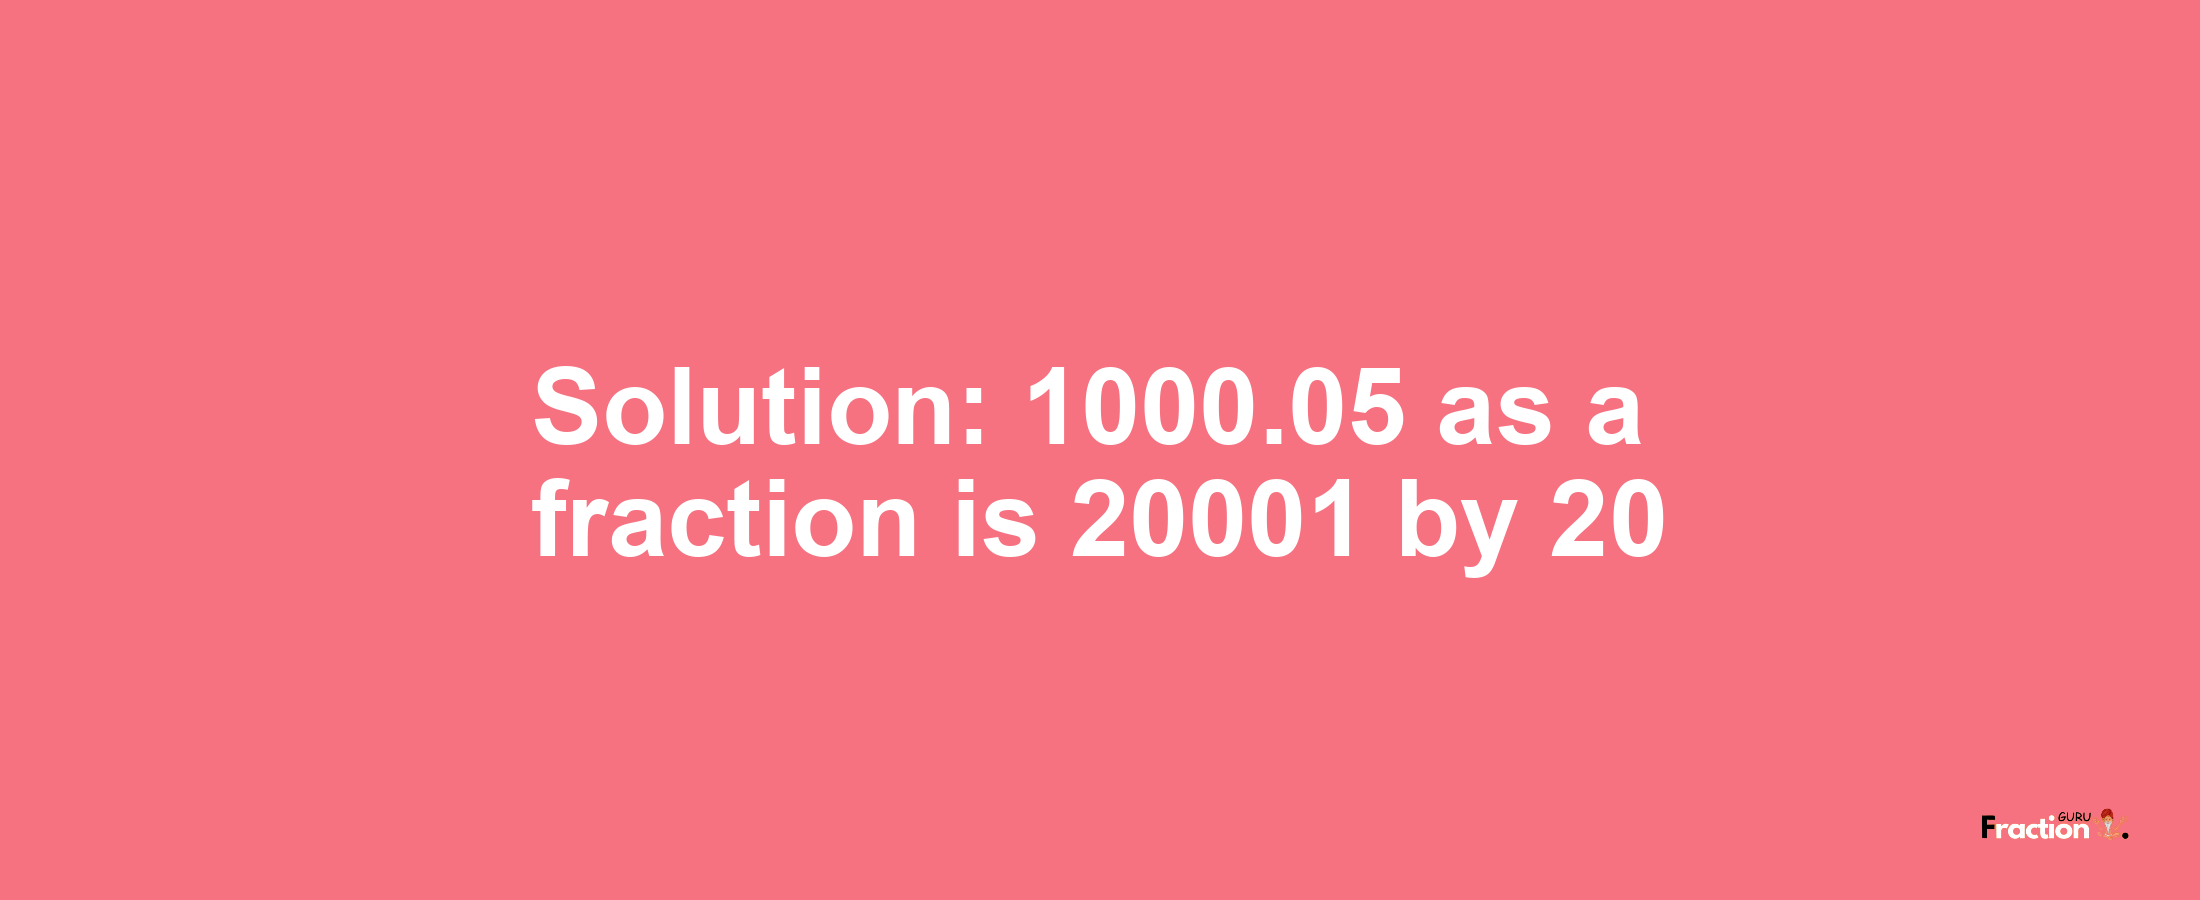 Solution:1000.05 as a fraction is 20001/20